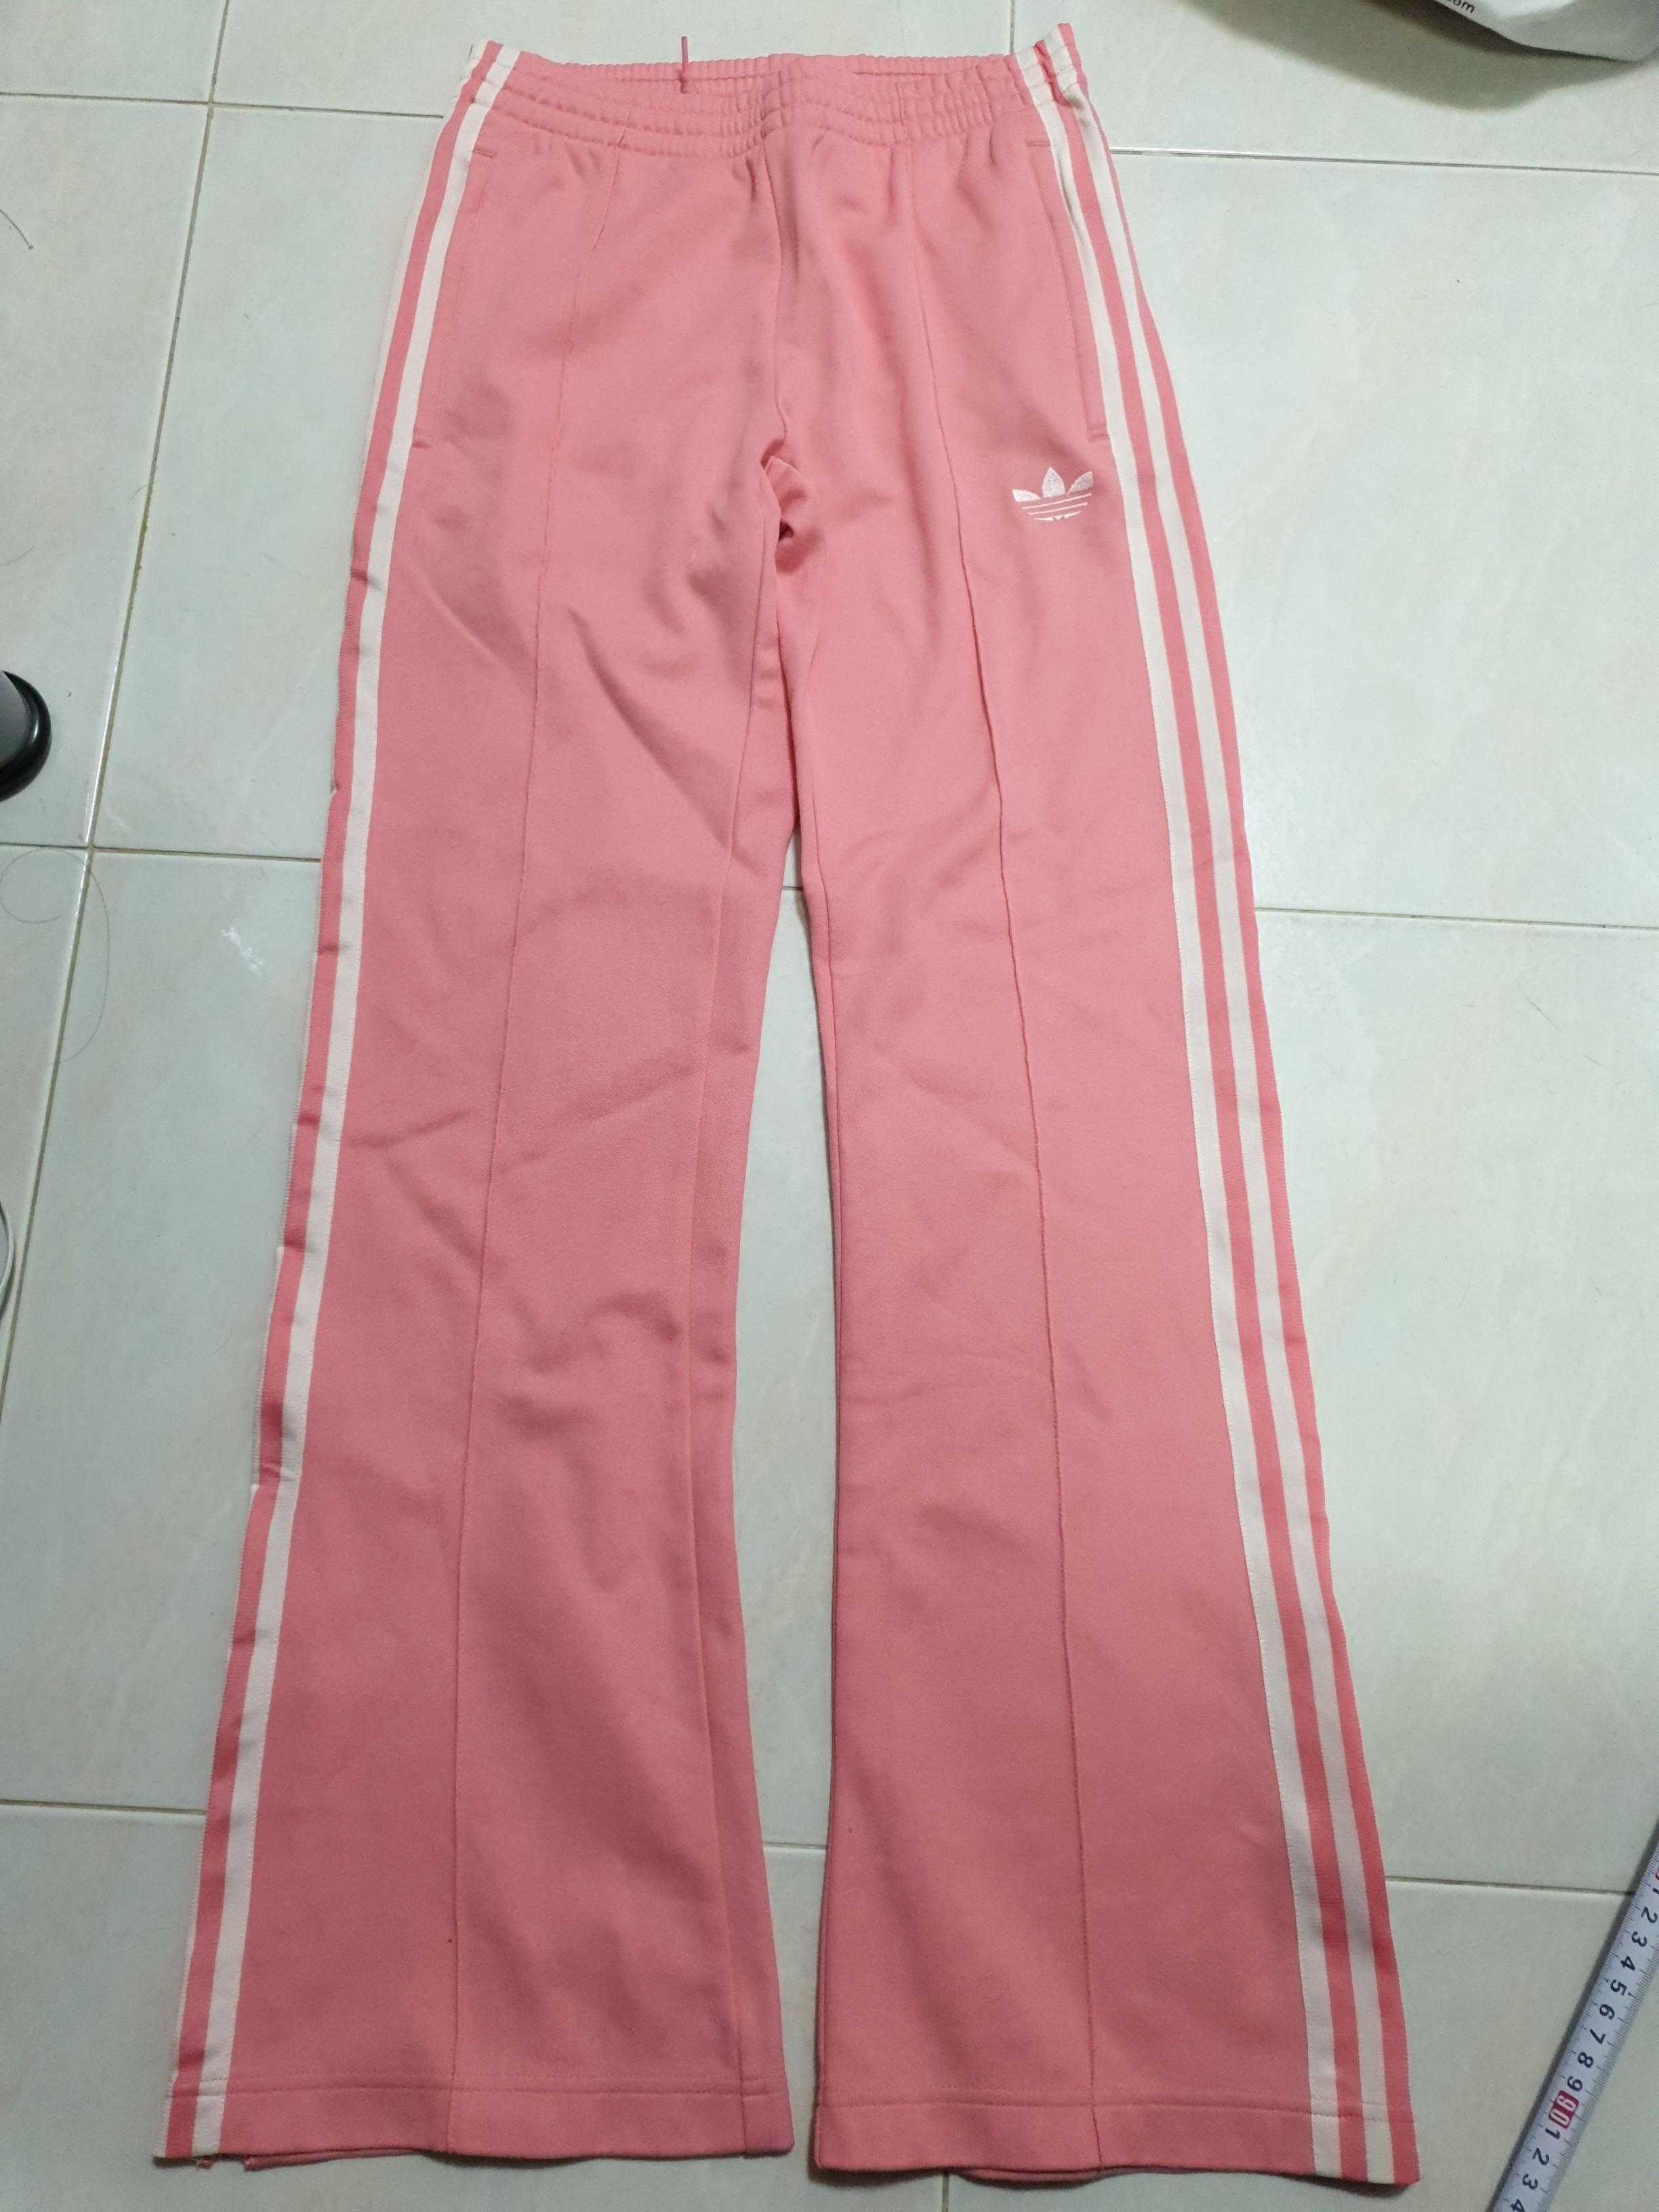 pink bootcut jeans